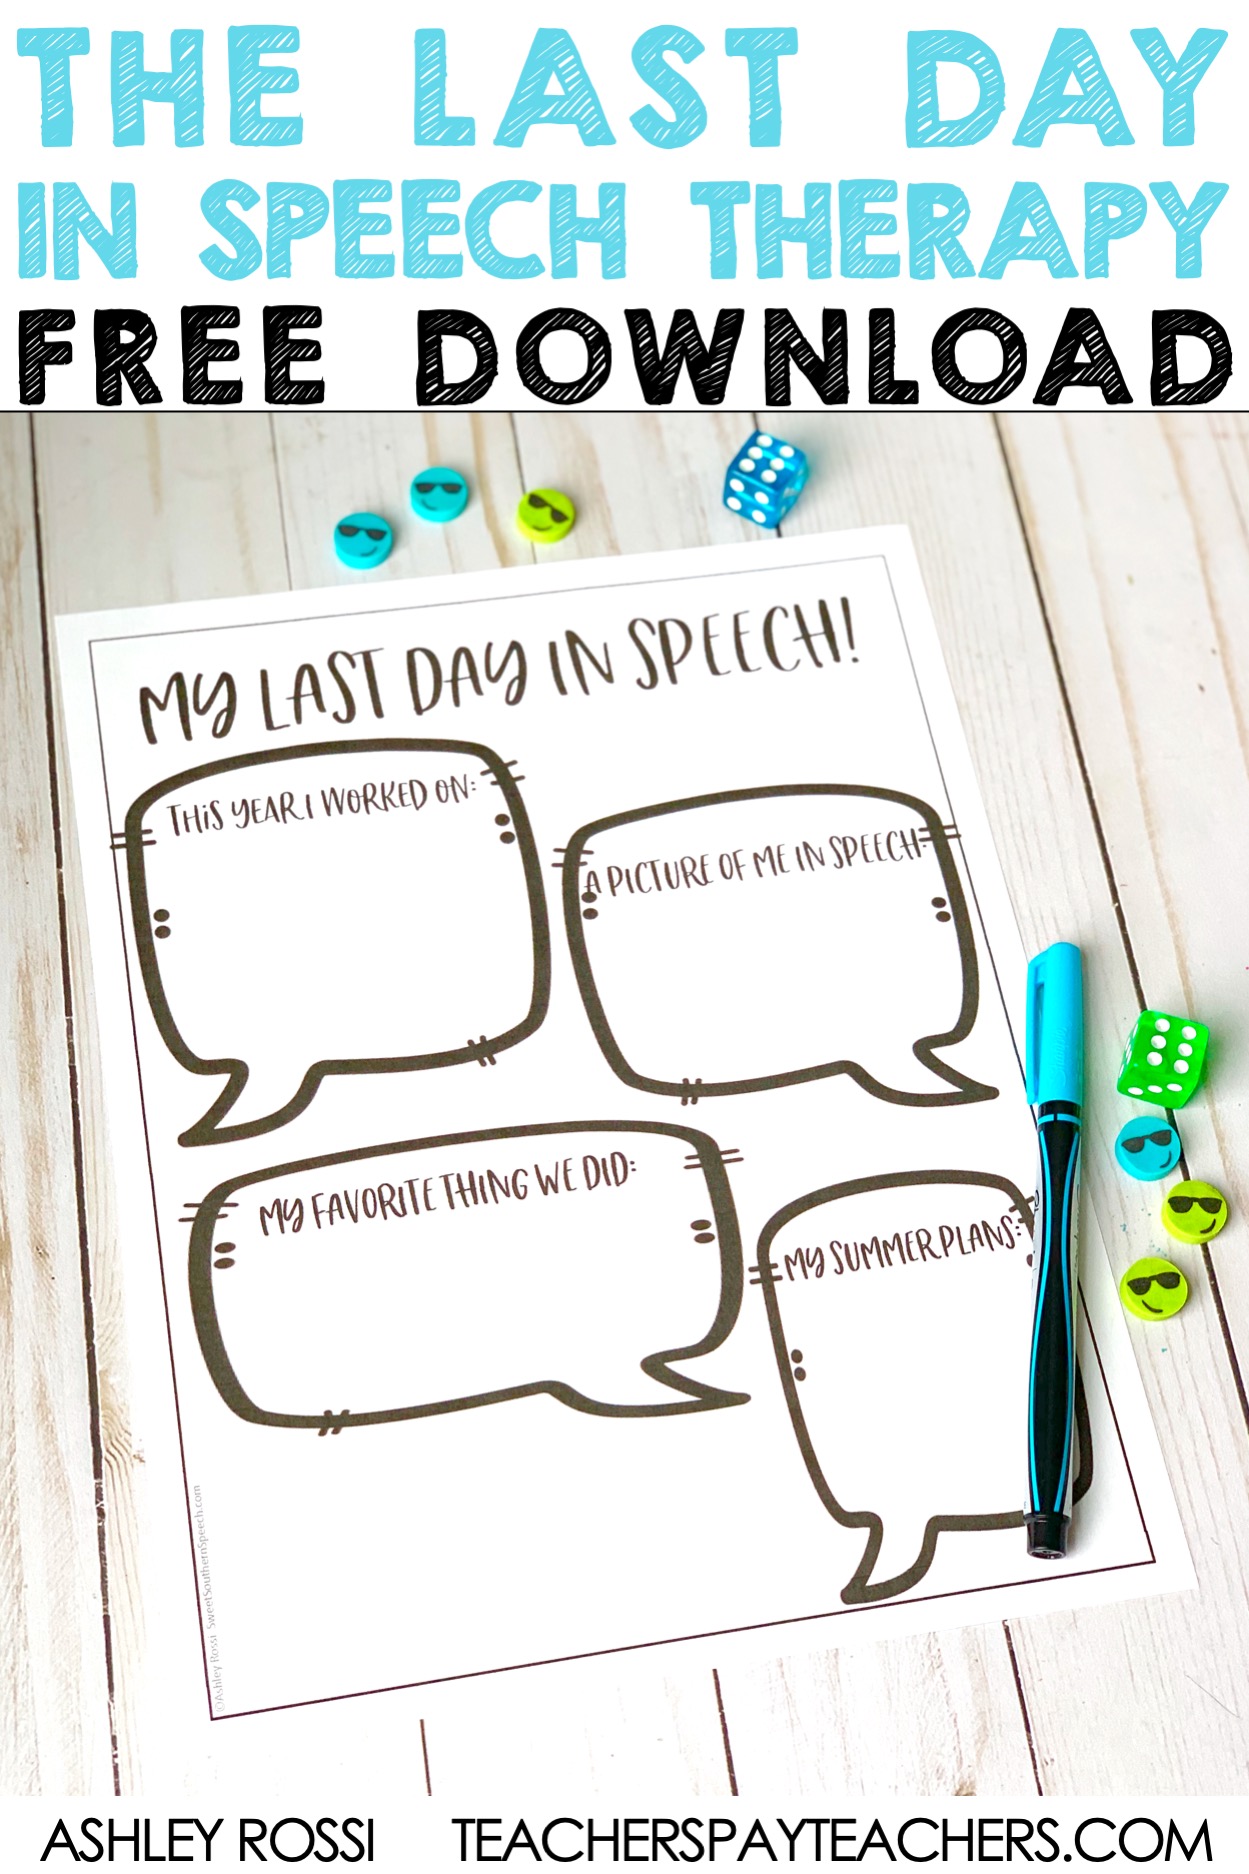 Free activities for the last day of school in speech therapy